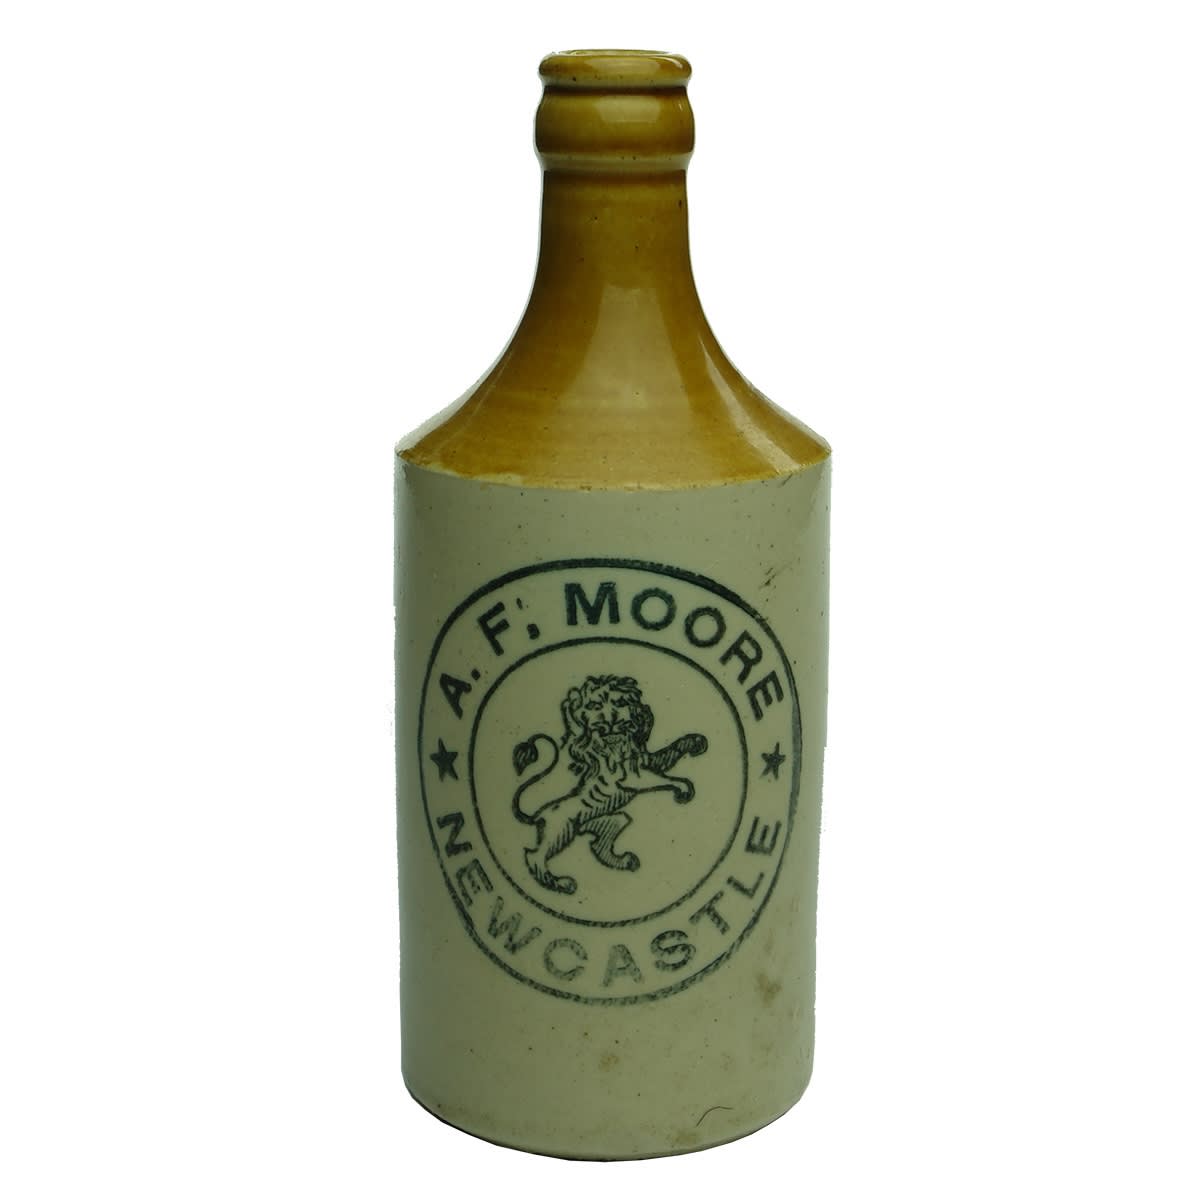 Ginger Beer. A. F. Moore, Newcastle. Crown Seal. Mauri Bros. & Thomson. (New South Wales)